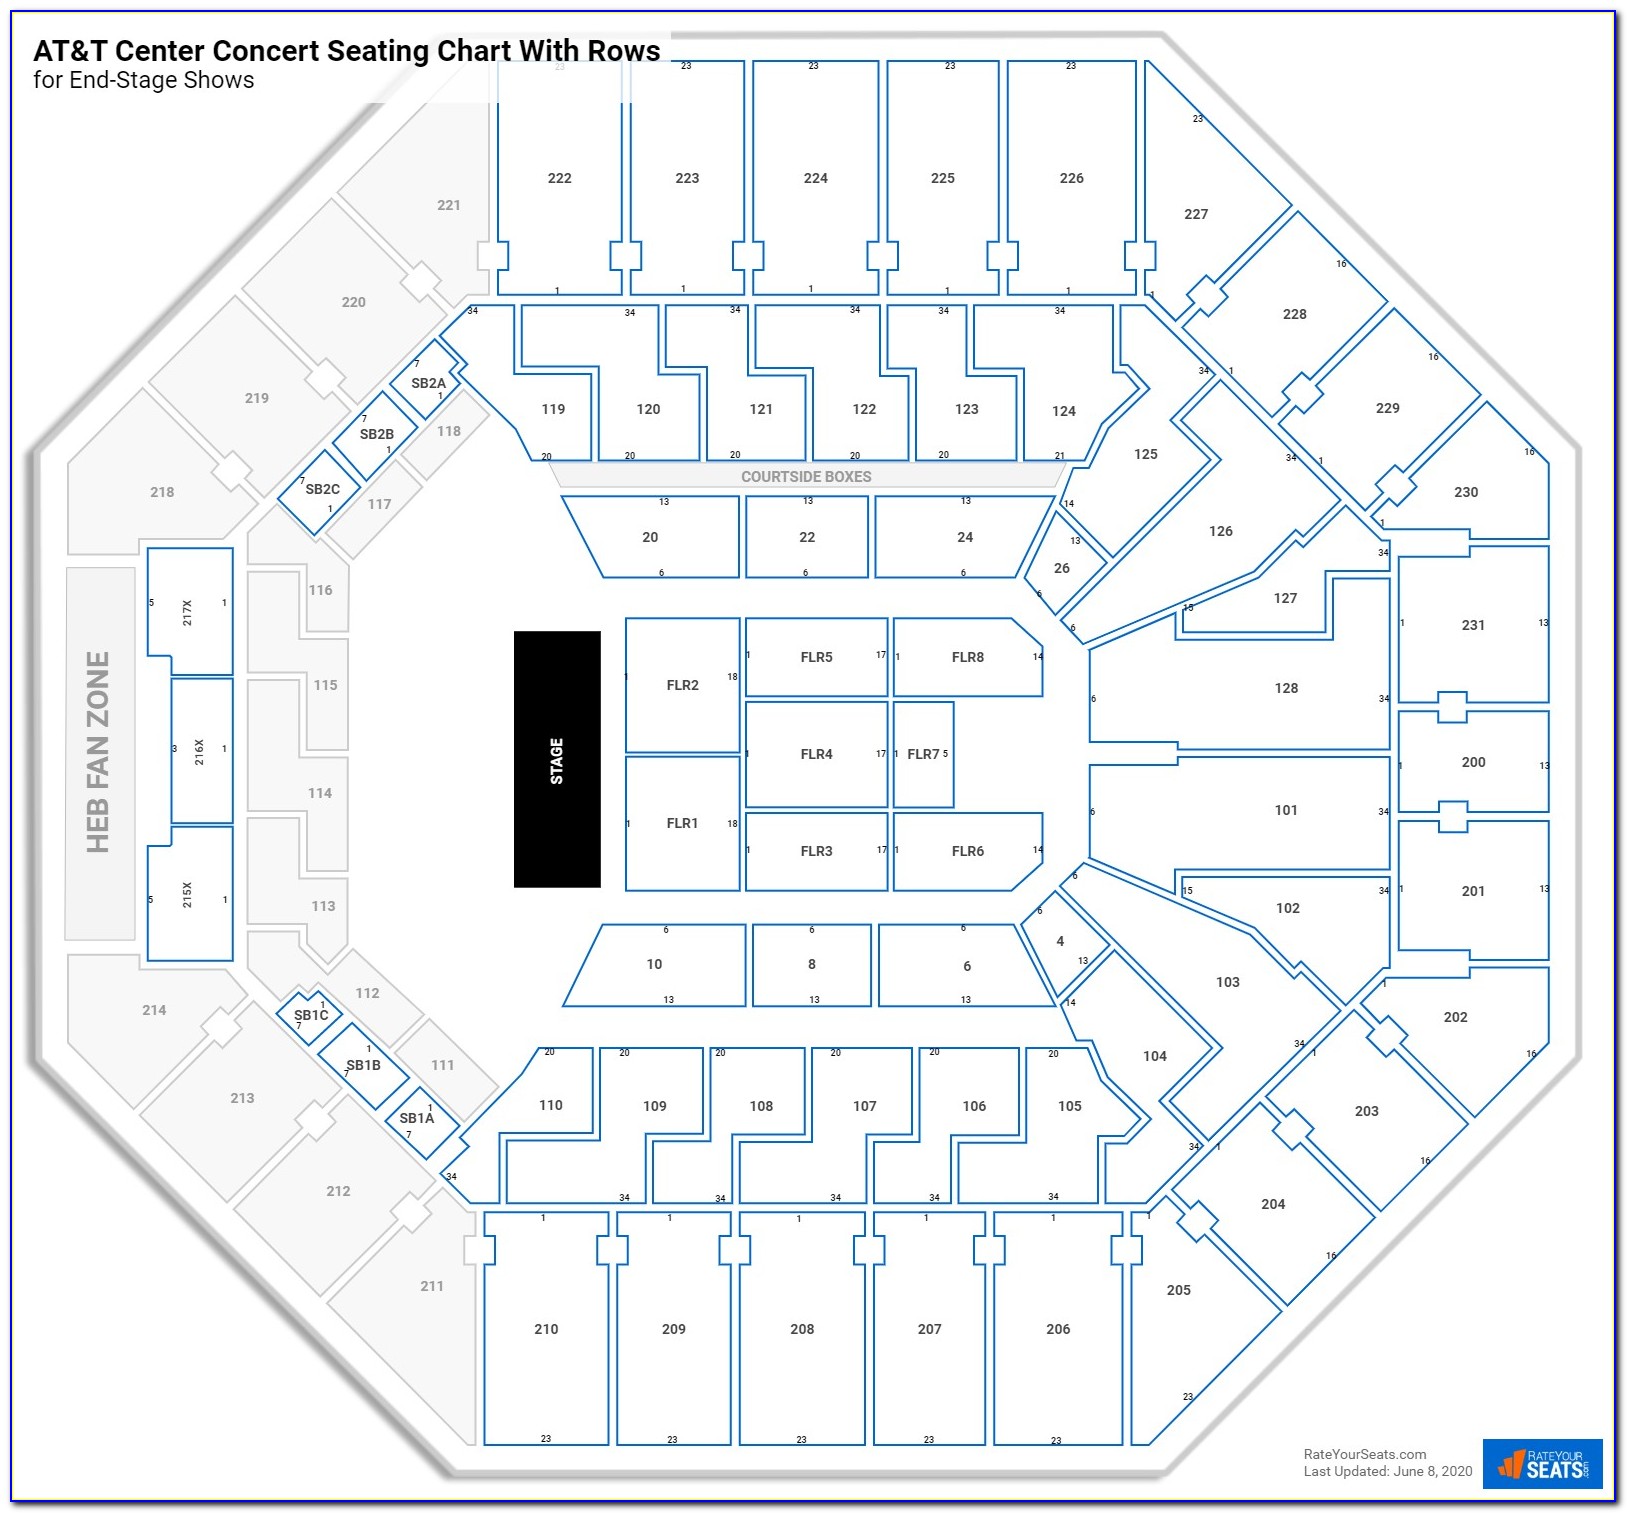 At&t Stadium Seating Map For Concerts